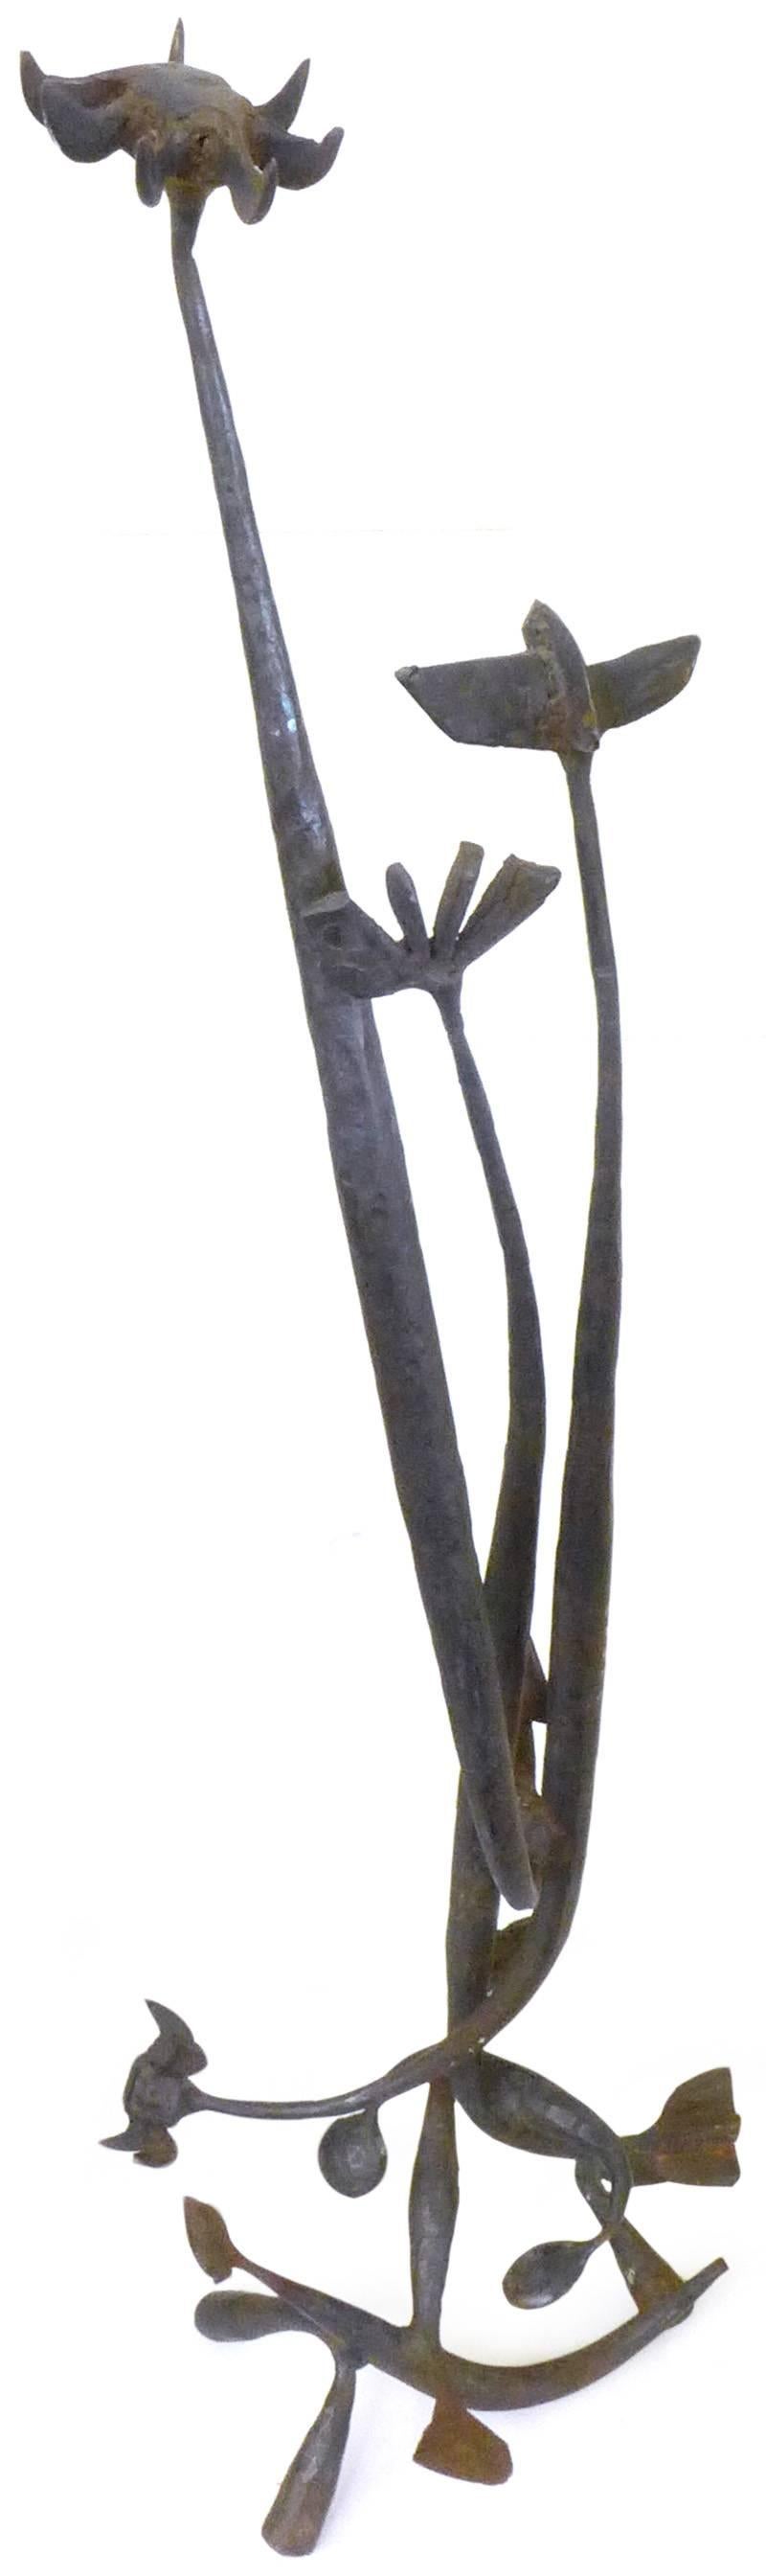 An incredible, Brutalist, wrought iron sculpture. Impressive and beautifully-executed, a towering cluster of stylized botanical elements welded together, wearing scattered, hand-worked texturing. Great from all angles and exuding a distinct Kinetic